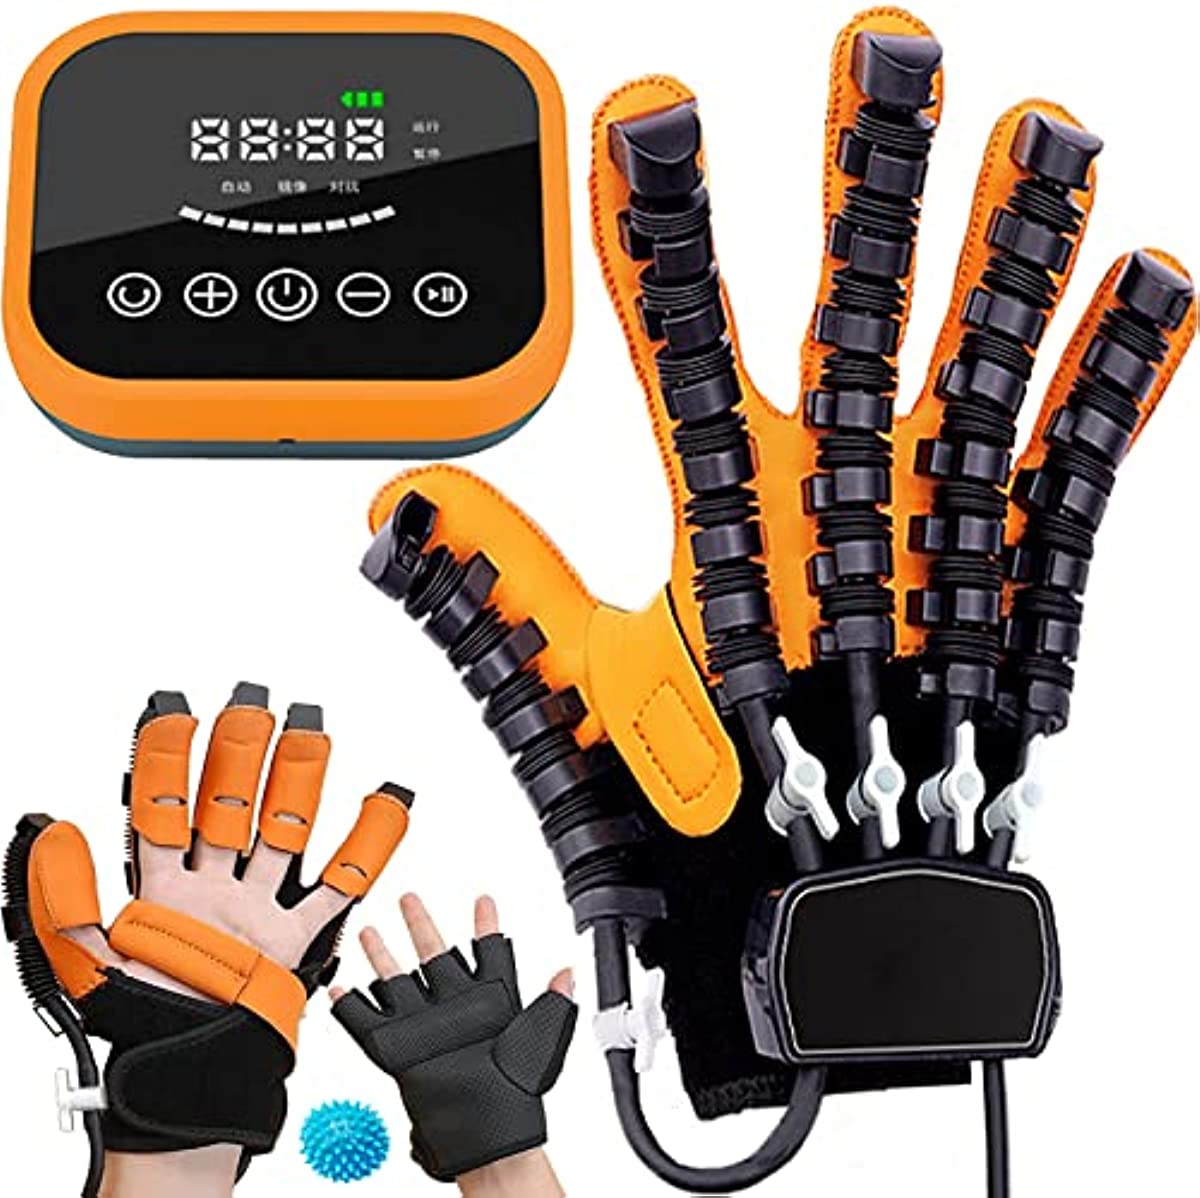 Rehabilitation Robot Gloves Upgrade Hemiplegia Hand Stroke Recovery Equipment, Finger Exerciser & Hand Strengthener Physical Therapy for Hand Dysfunction Patients(Color:Right hand,Size:Small)